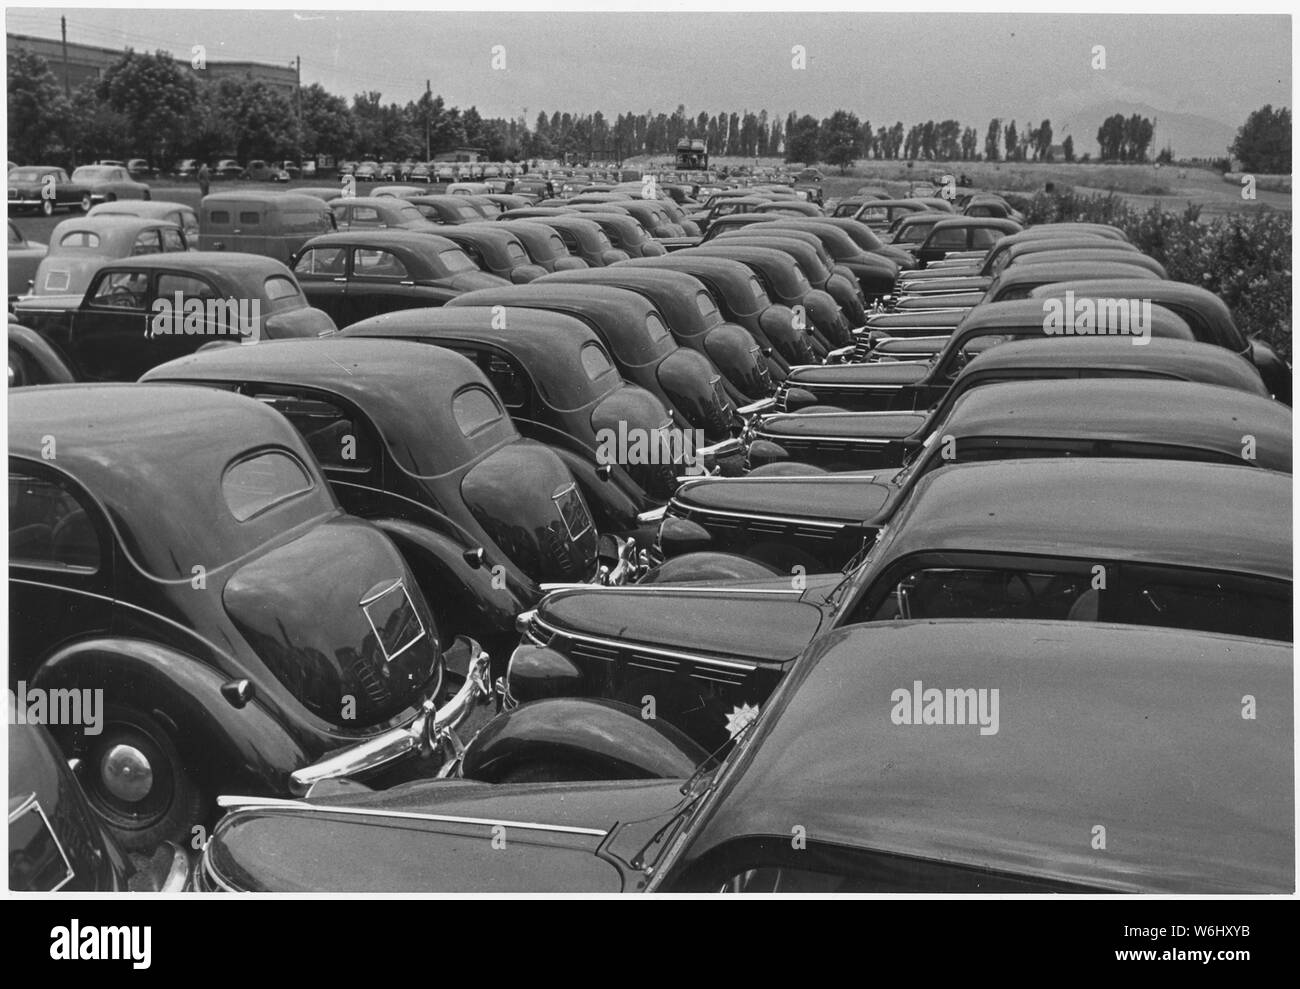 Italy. In 1950, Economic Cooperation Administration's investment showed startling results: Fiat total production amounted to 150 billion lire (approx. $240 million), 70 of which was accounted for by motor vehicle production Stock Photo